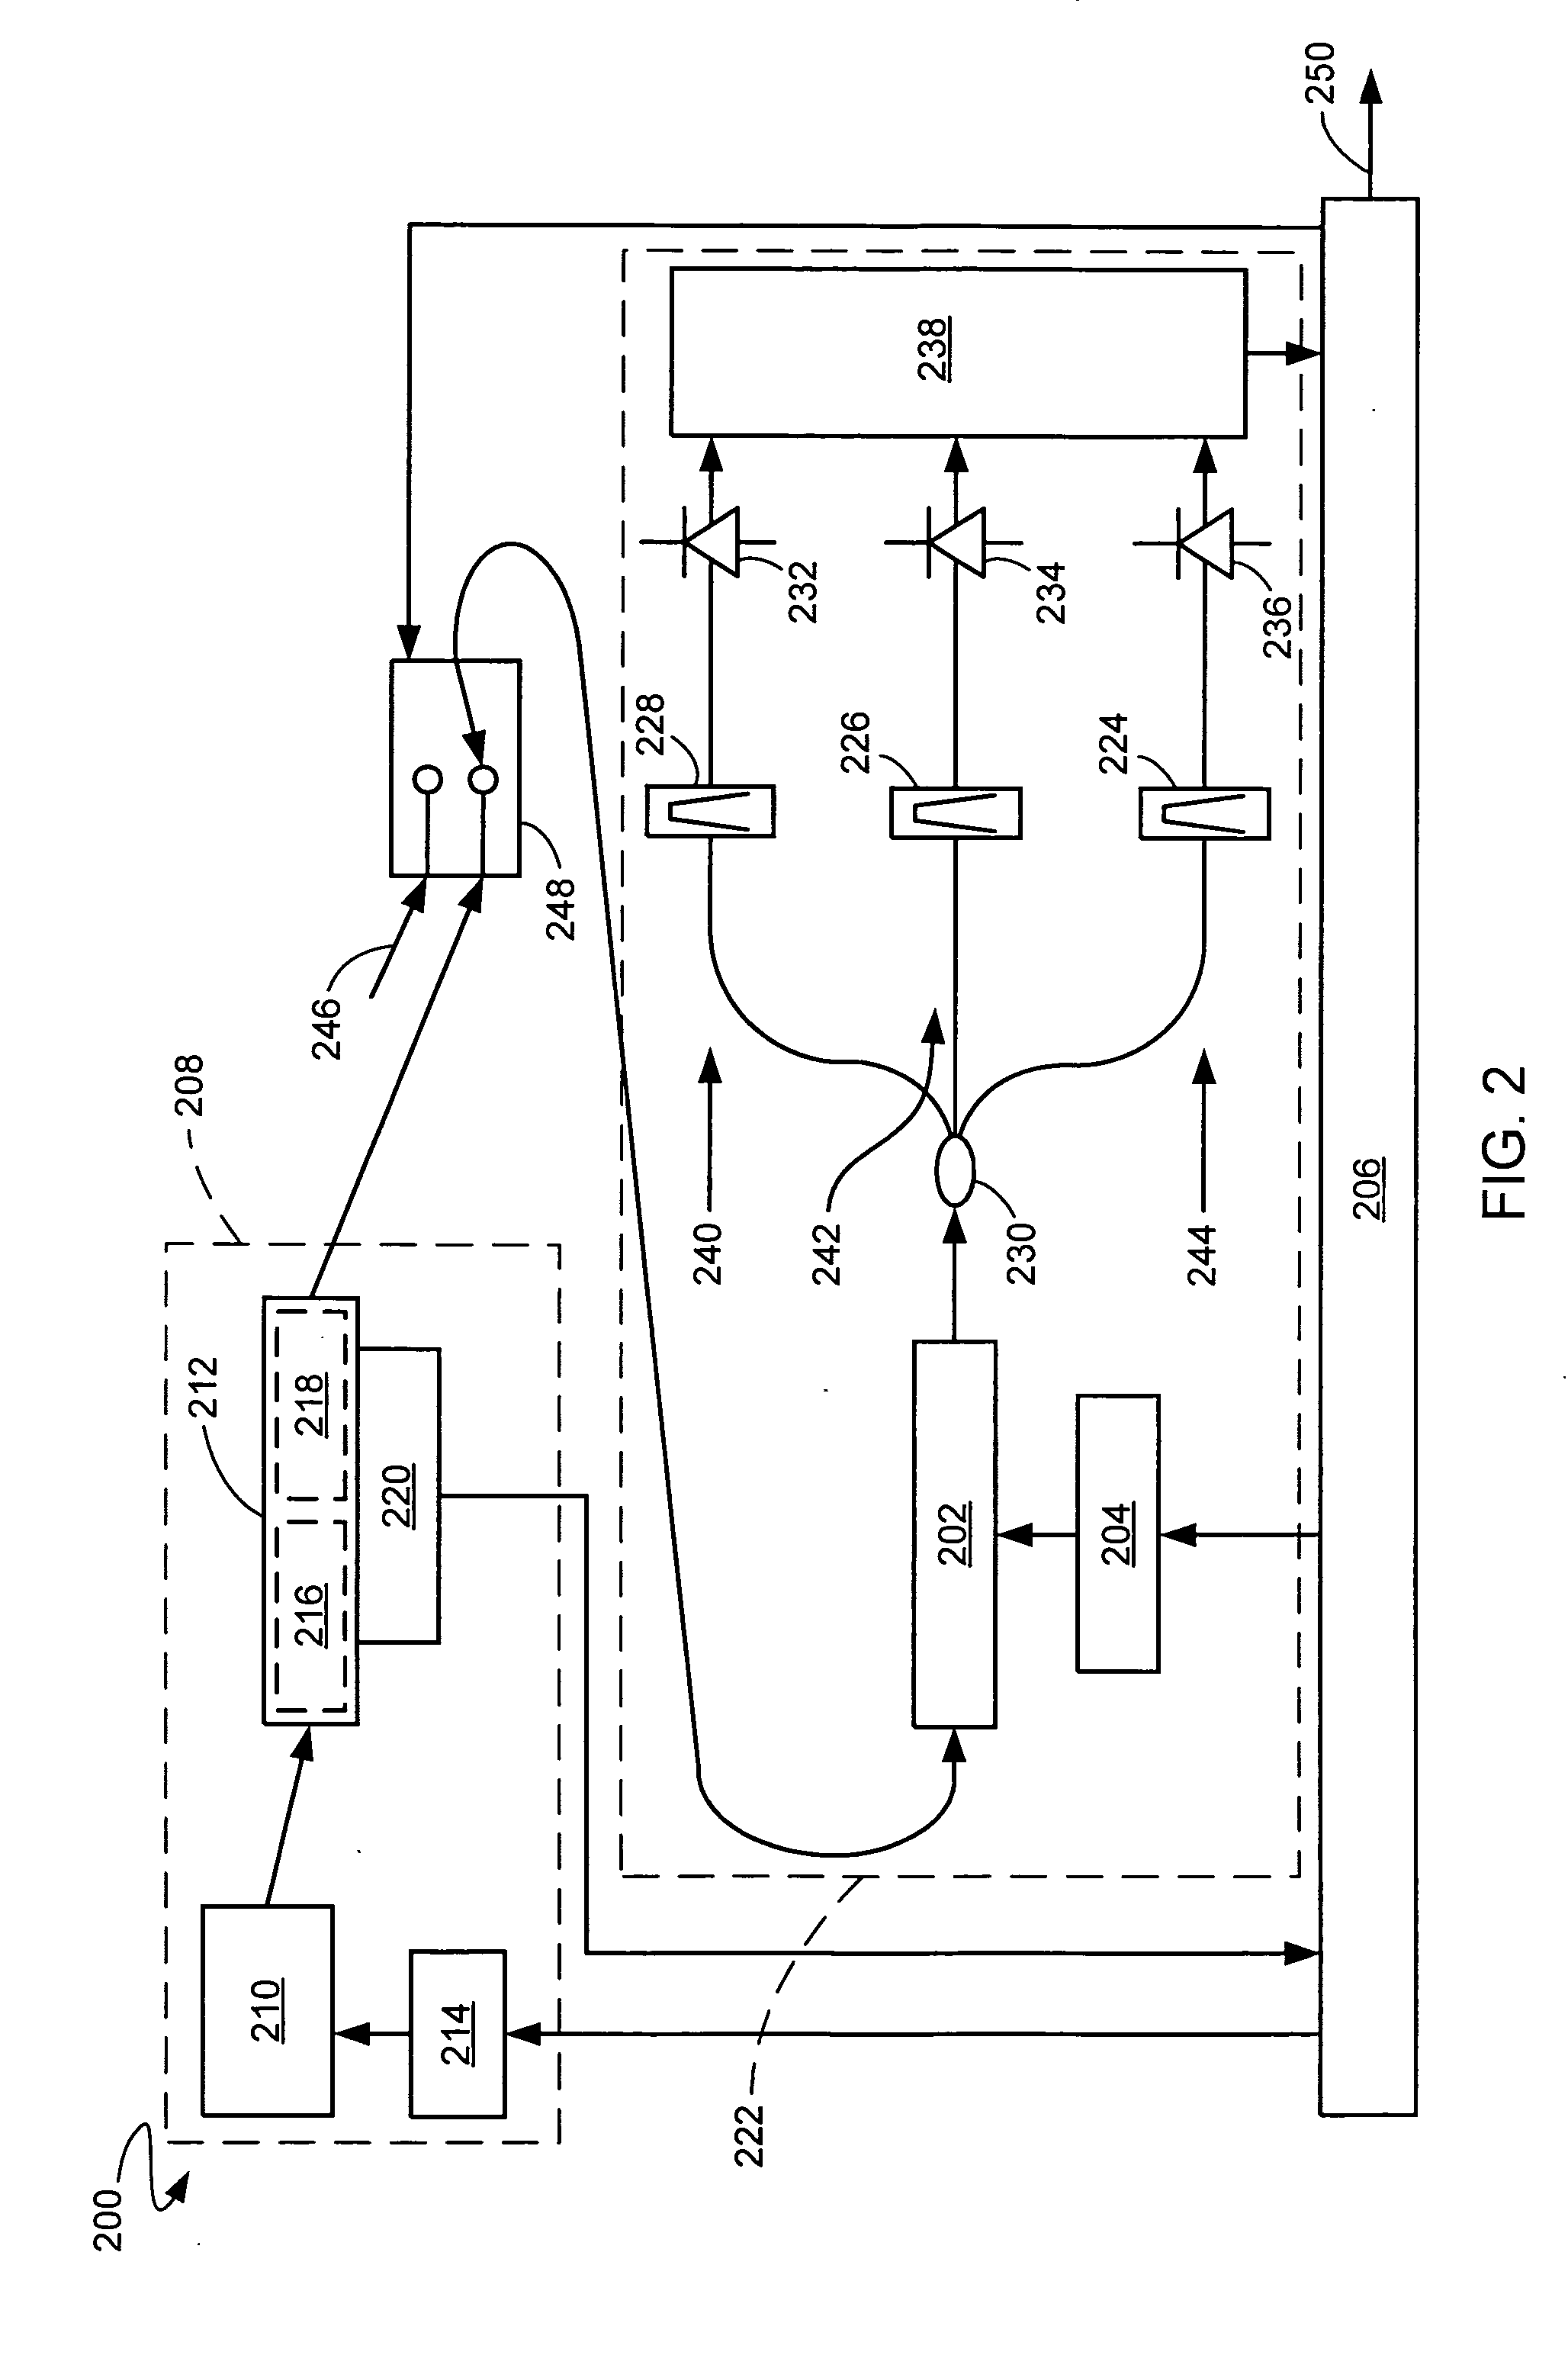 Broad-and inter-band multi-wavelength-reference method and apparatus for wavelength measurement or monitoring systems